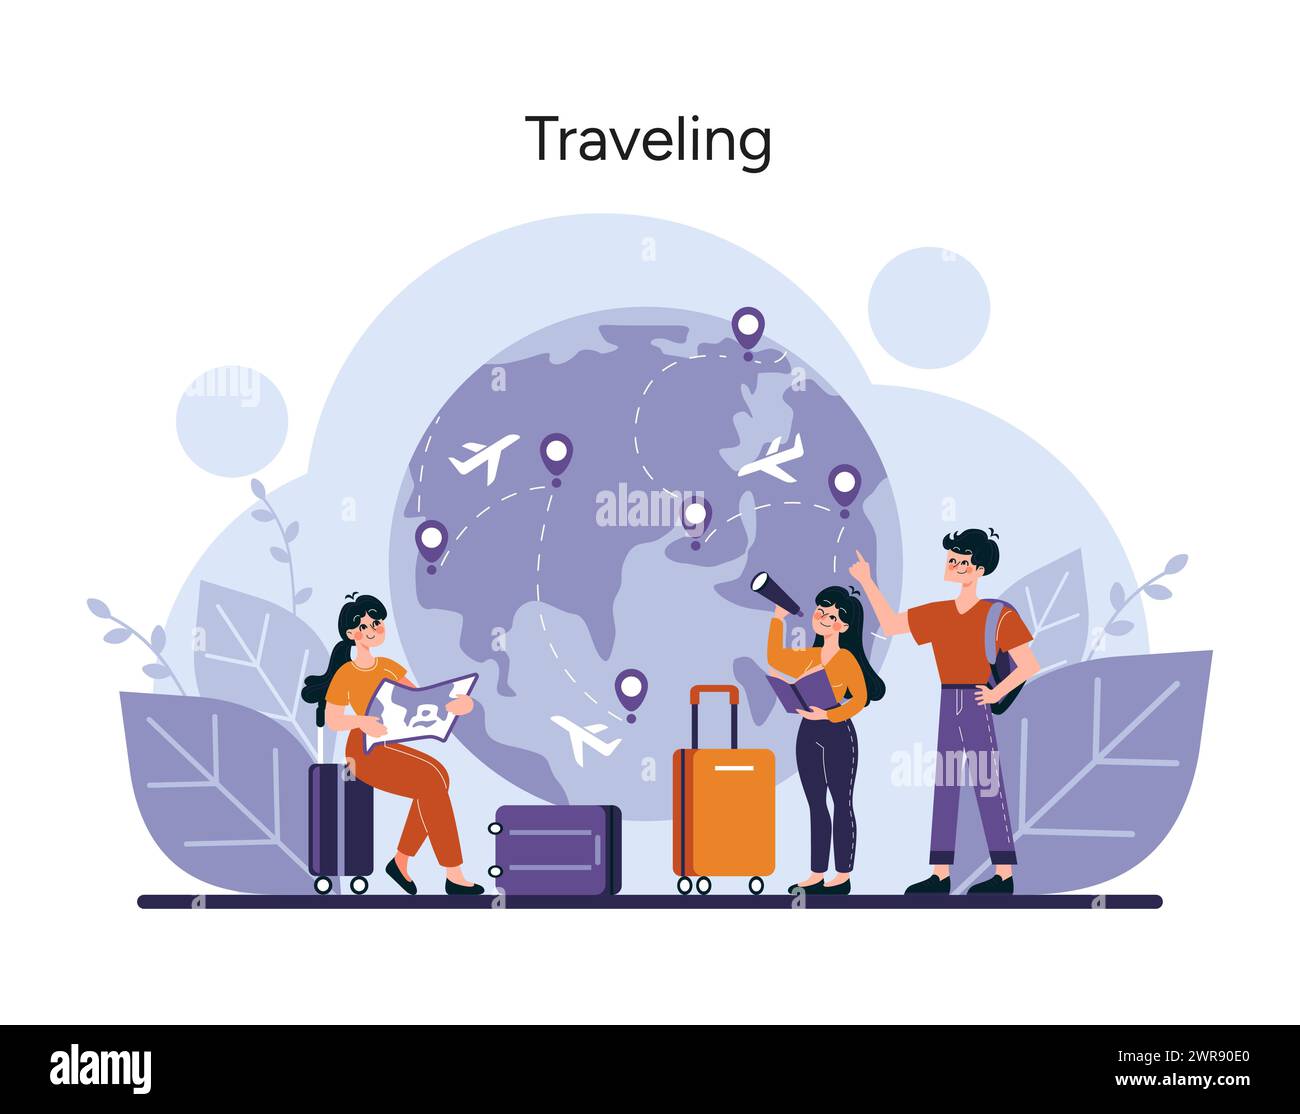 Traveling theme set. Family ready for a journey, with luggage and a map, excitedly anticipating their adventures around the globe. Vector illustration Stock Vector